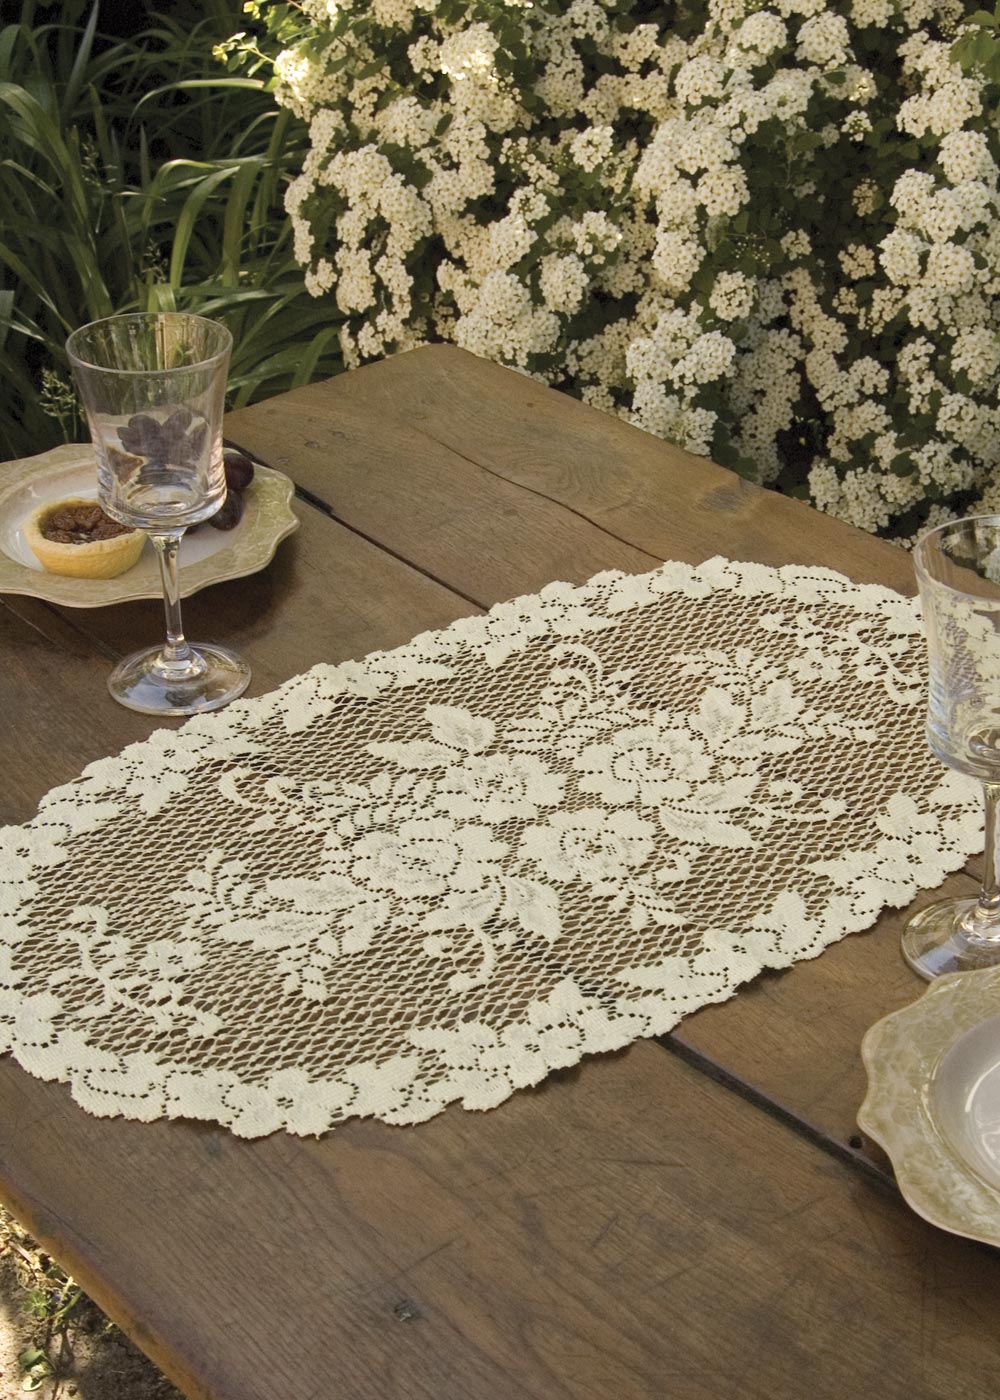 Heritage Lace Runner White Alpine Rose Vintage New Doilies Doily 15” X 44” 